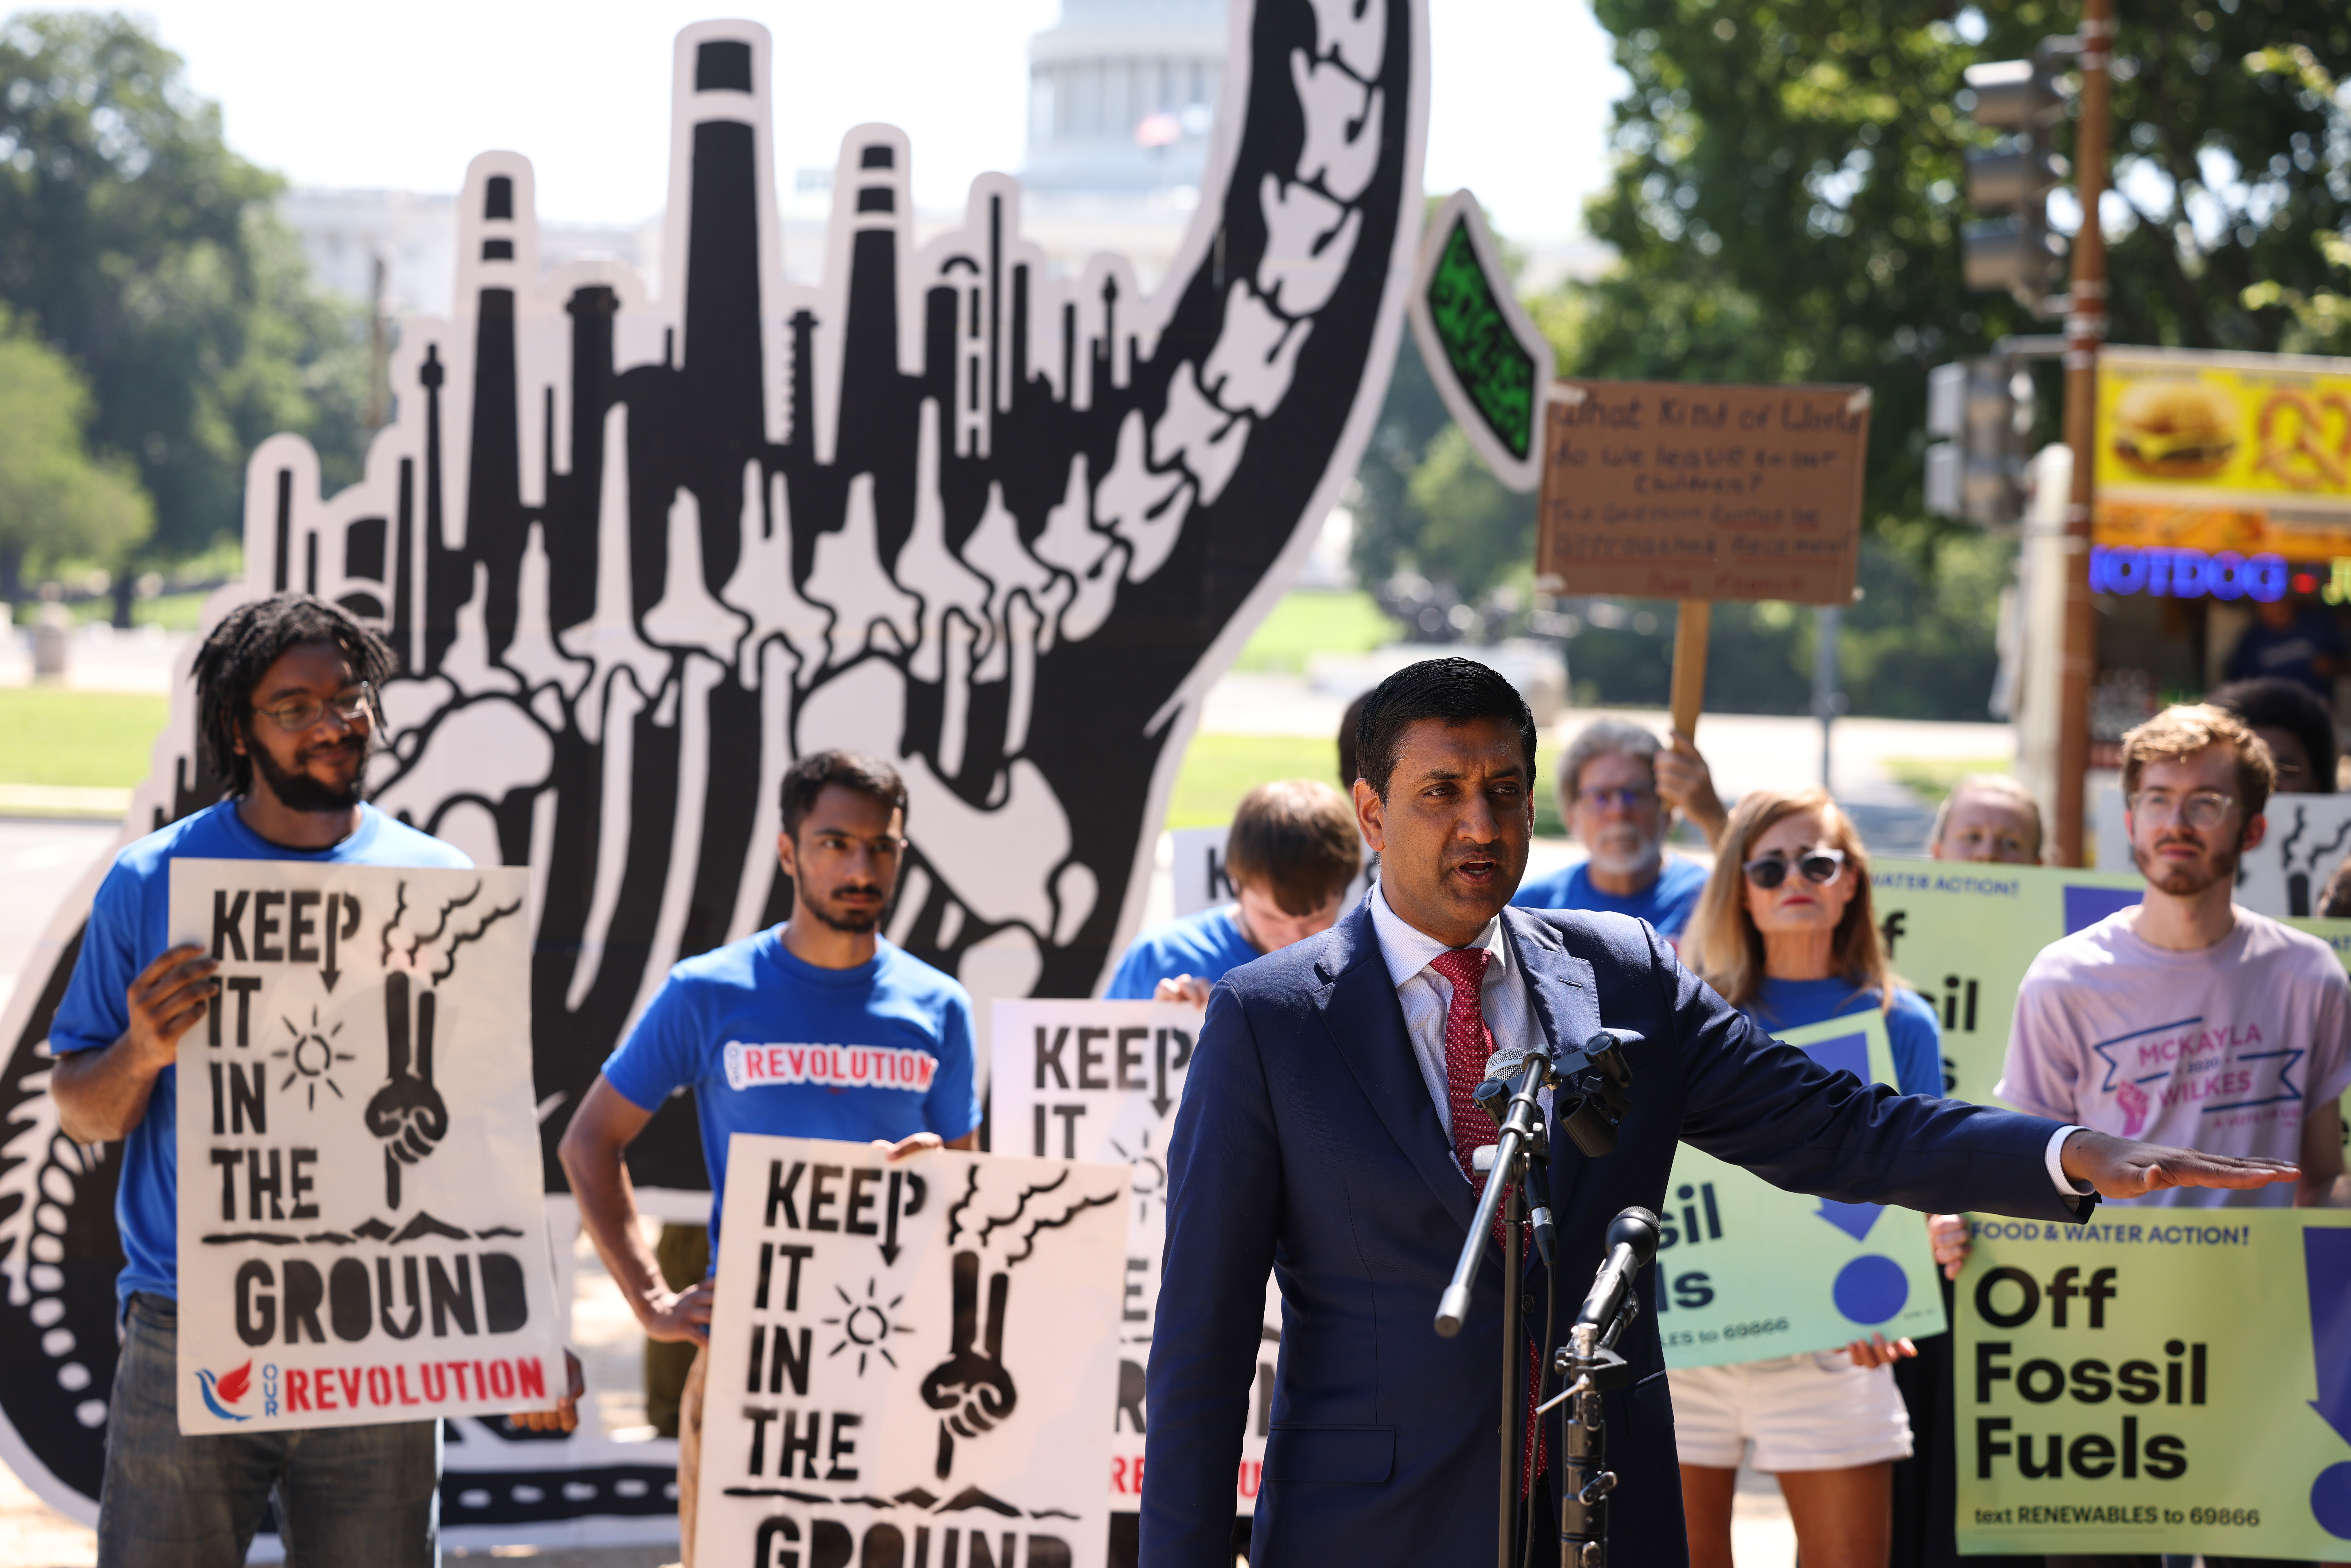 Rep. Ro Khanna speaks at an “End Fossil Fuel” rally near the U.S. Capitol on June 29. (Anna Moneymaker/Getty Images)